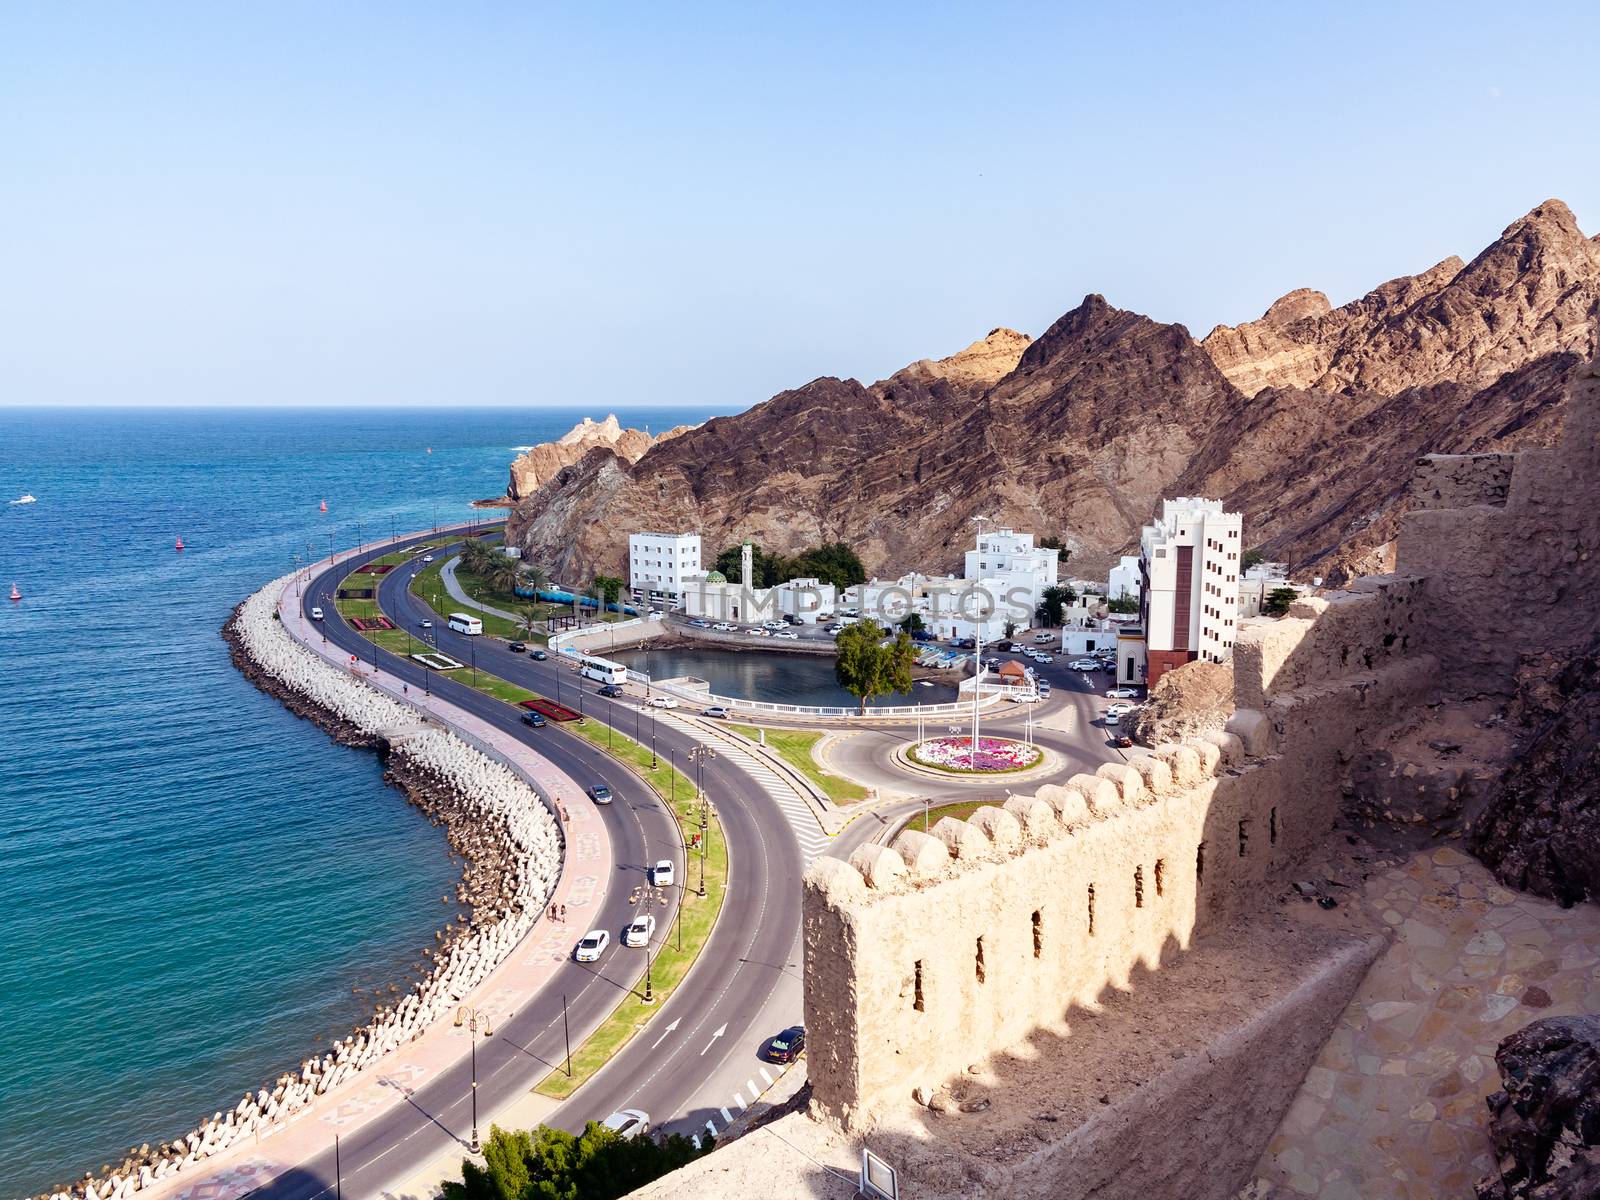 Panoramic view of the city Muscat capital of Oman and the coast of the Gulf of Oman from Fort Muttrah.